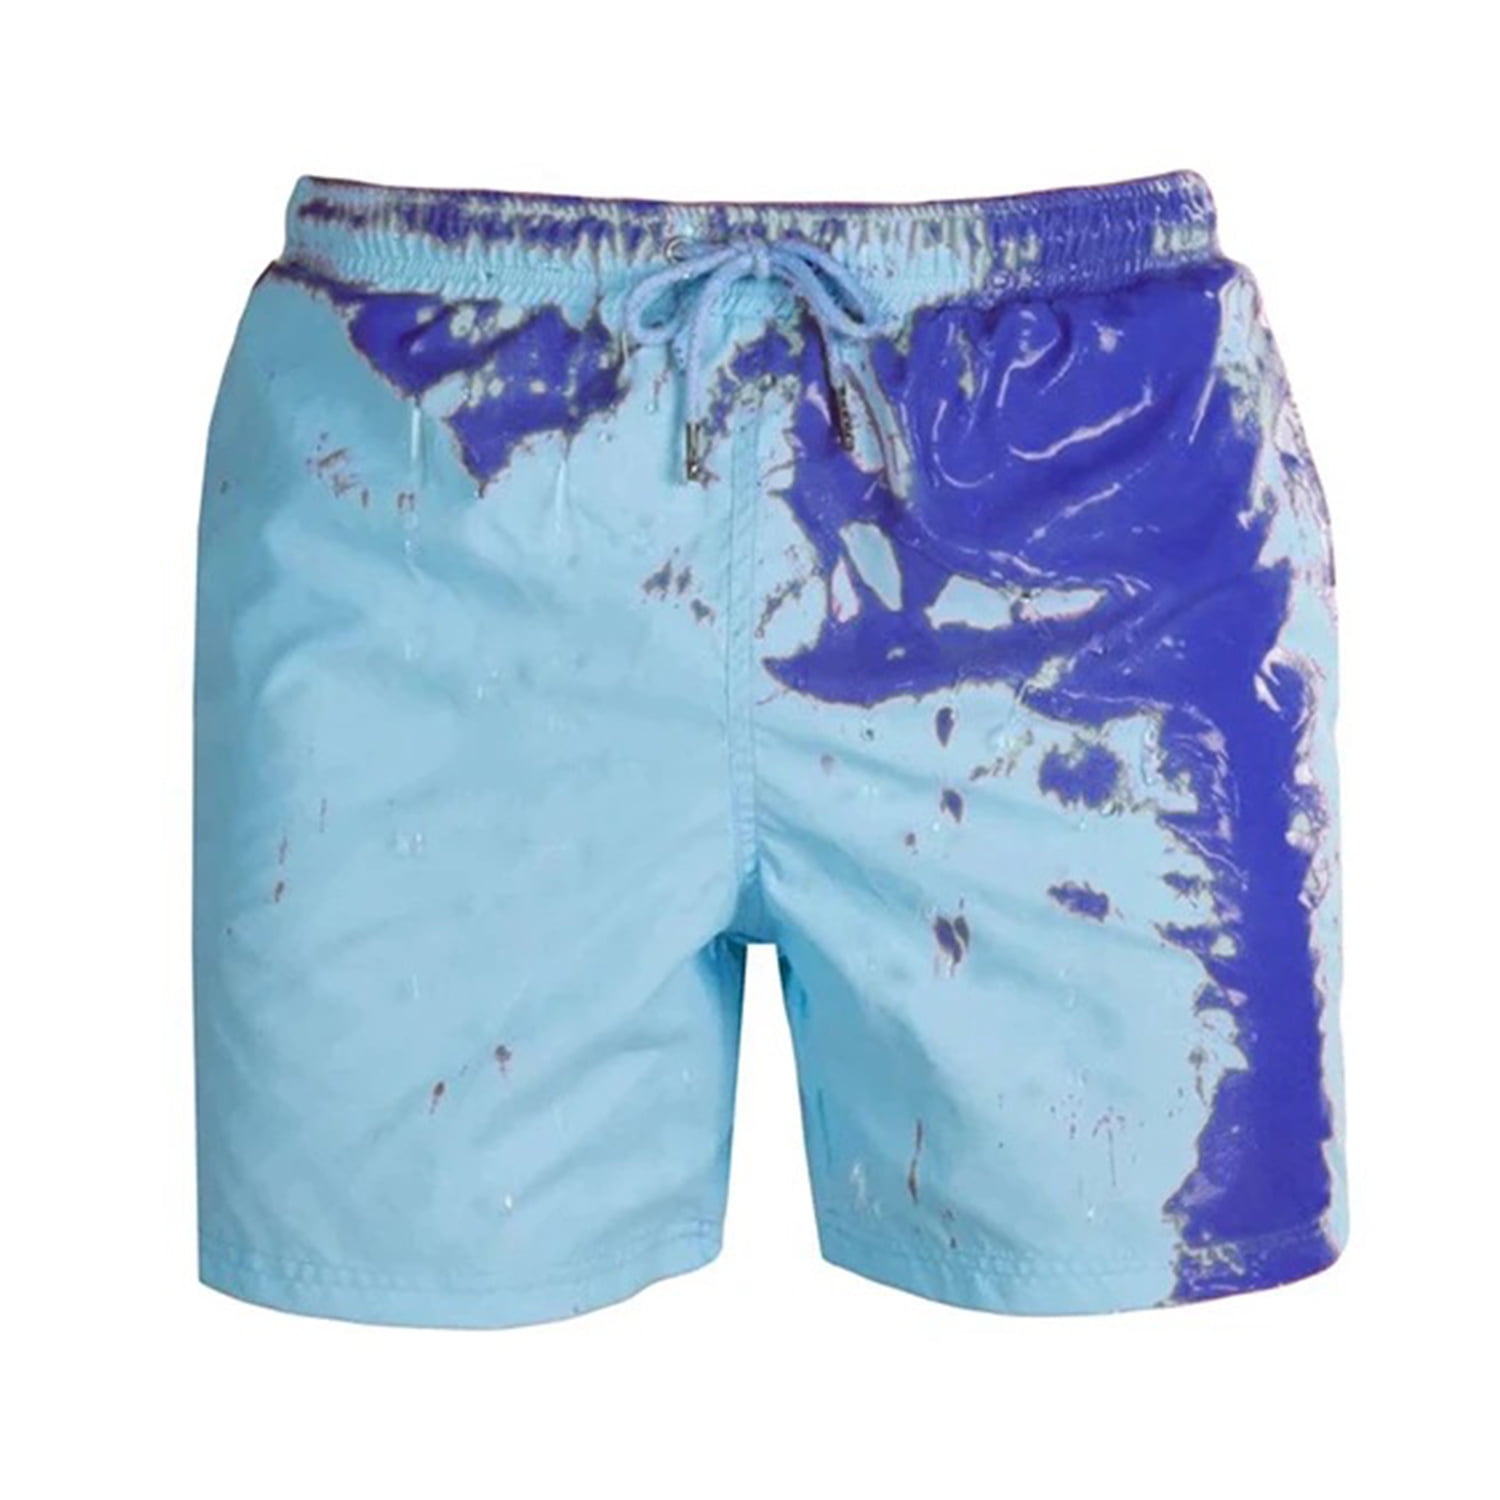 KAWELL Color Changing Swim Trunks for Men, Boys Quick Dry Sports Shorts ...